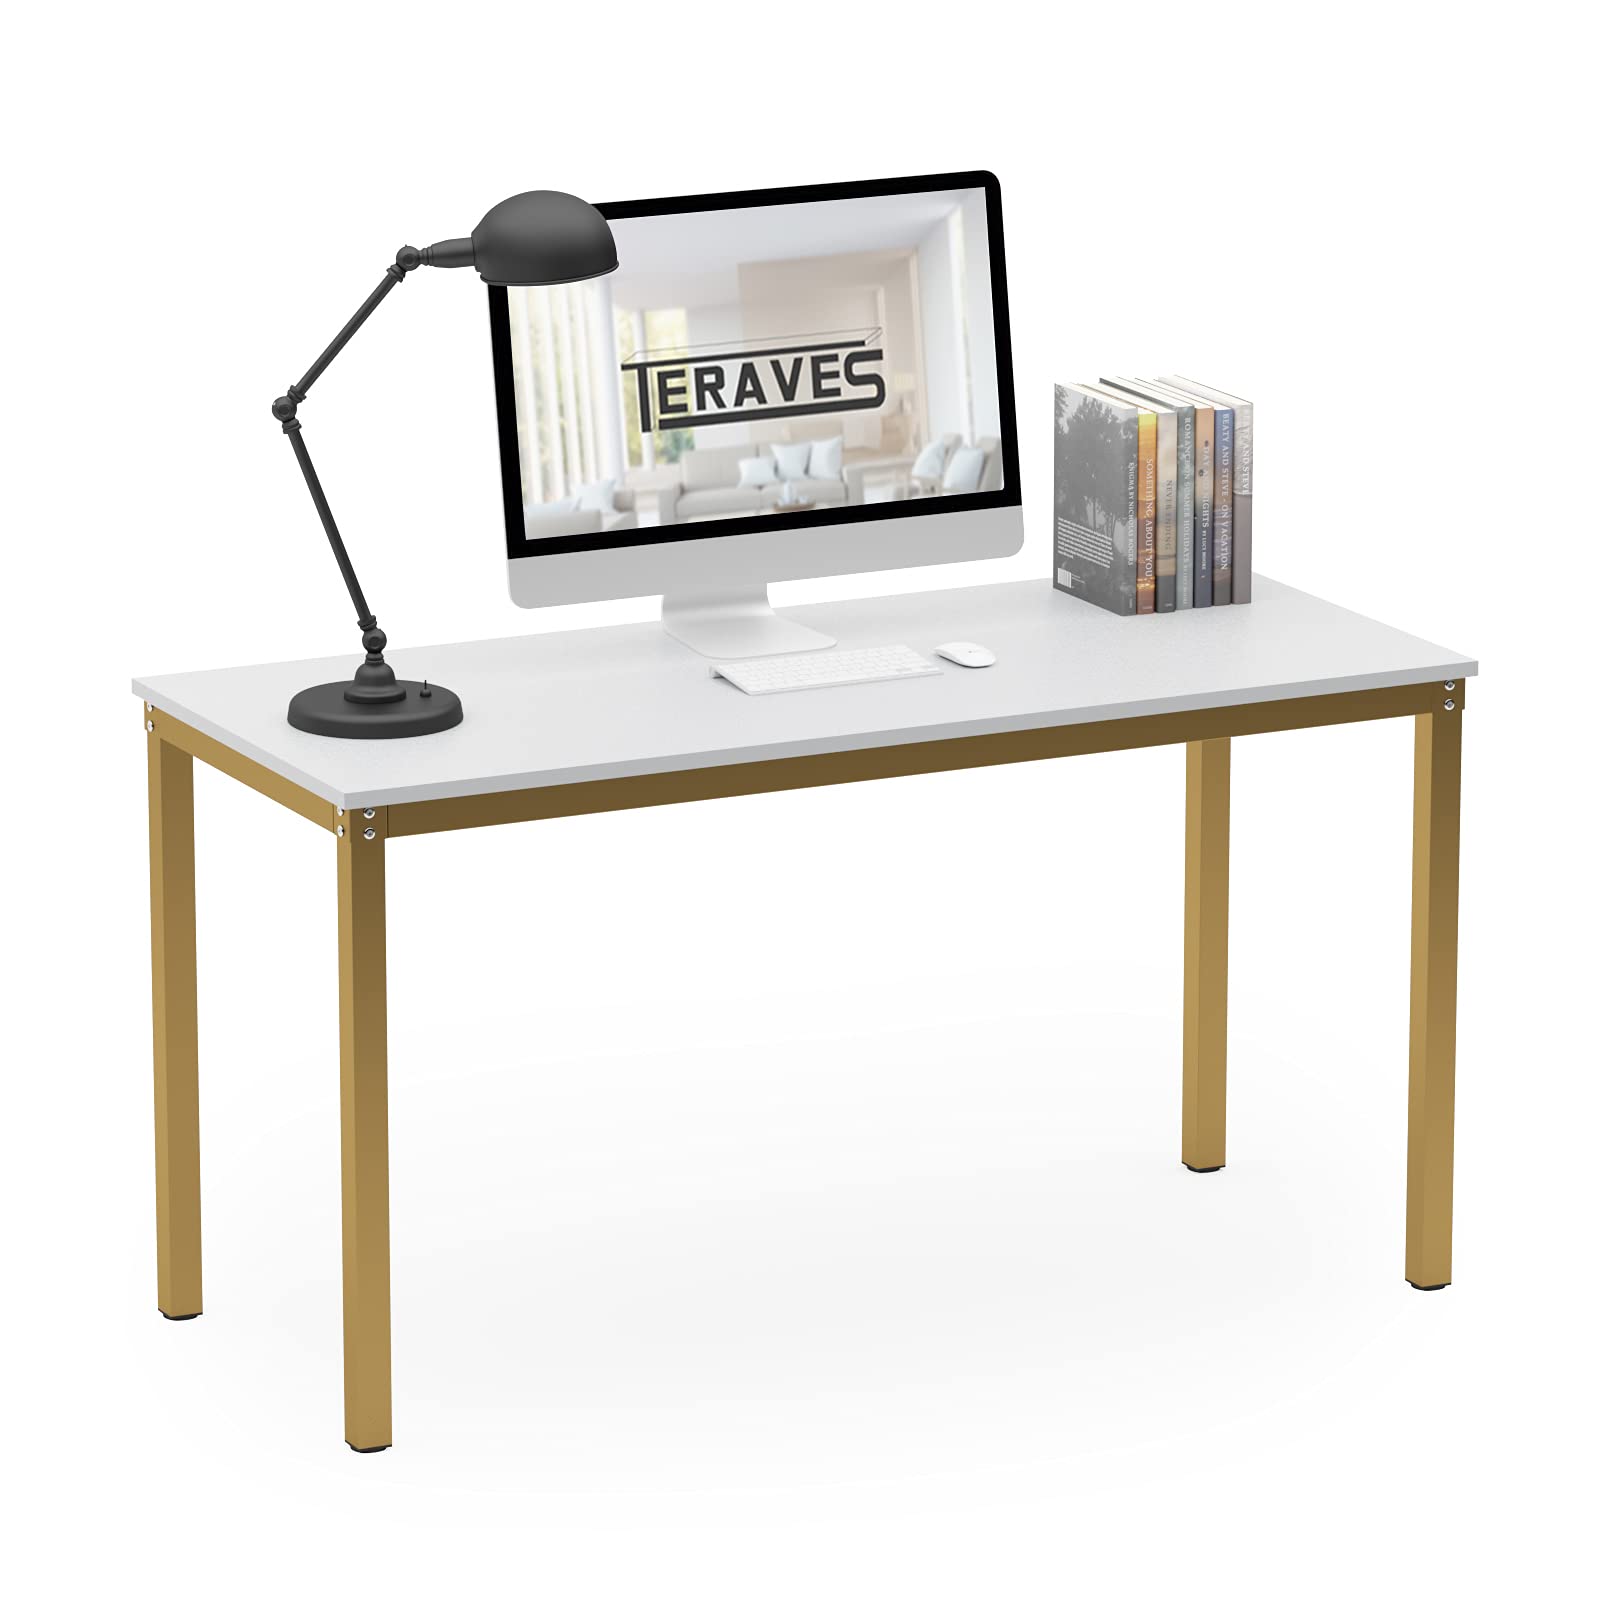 Teraves Computer Desk/Dining Table Office Desk Sturdy Writing Workstation for Home Office (39.37“, White)